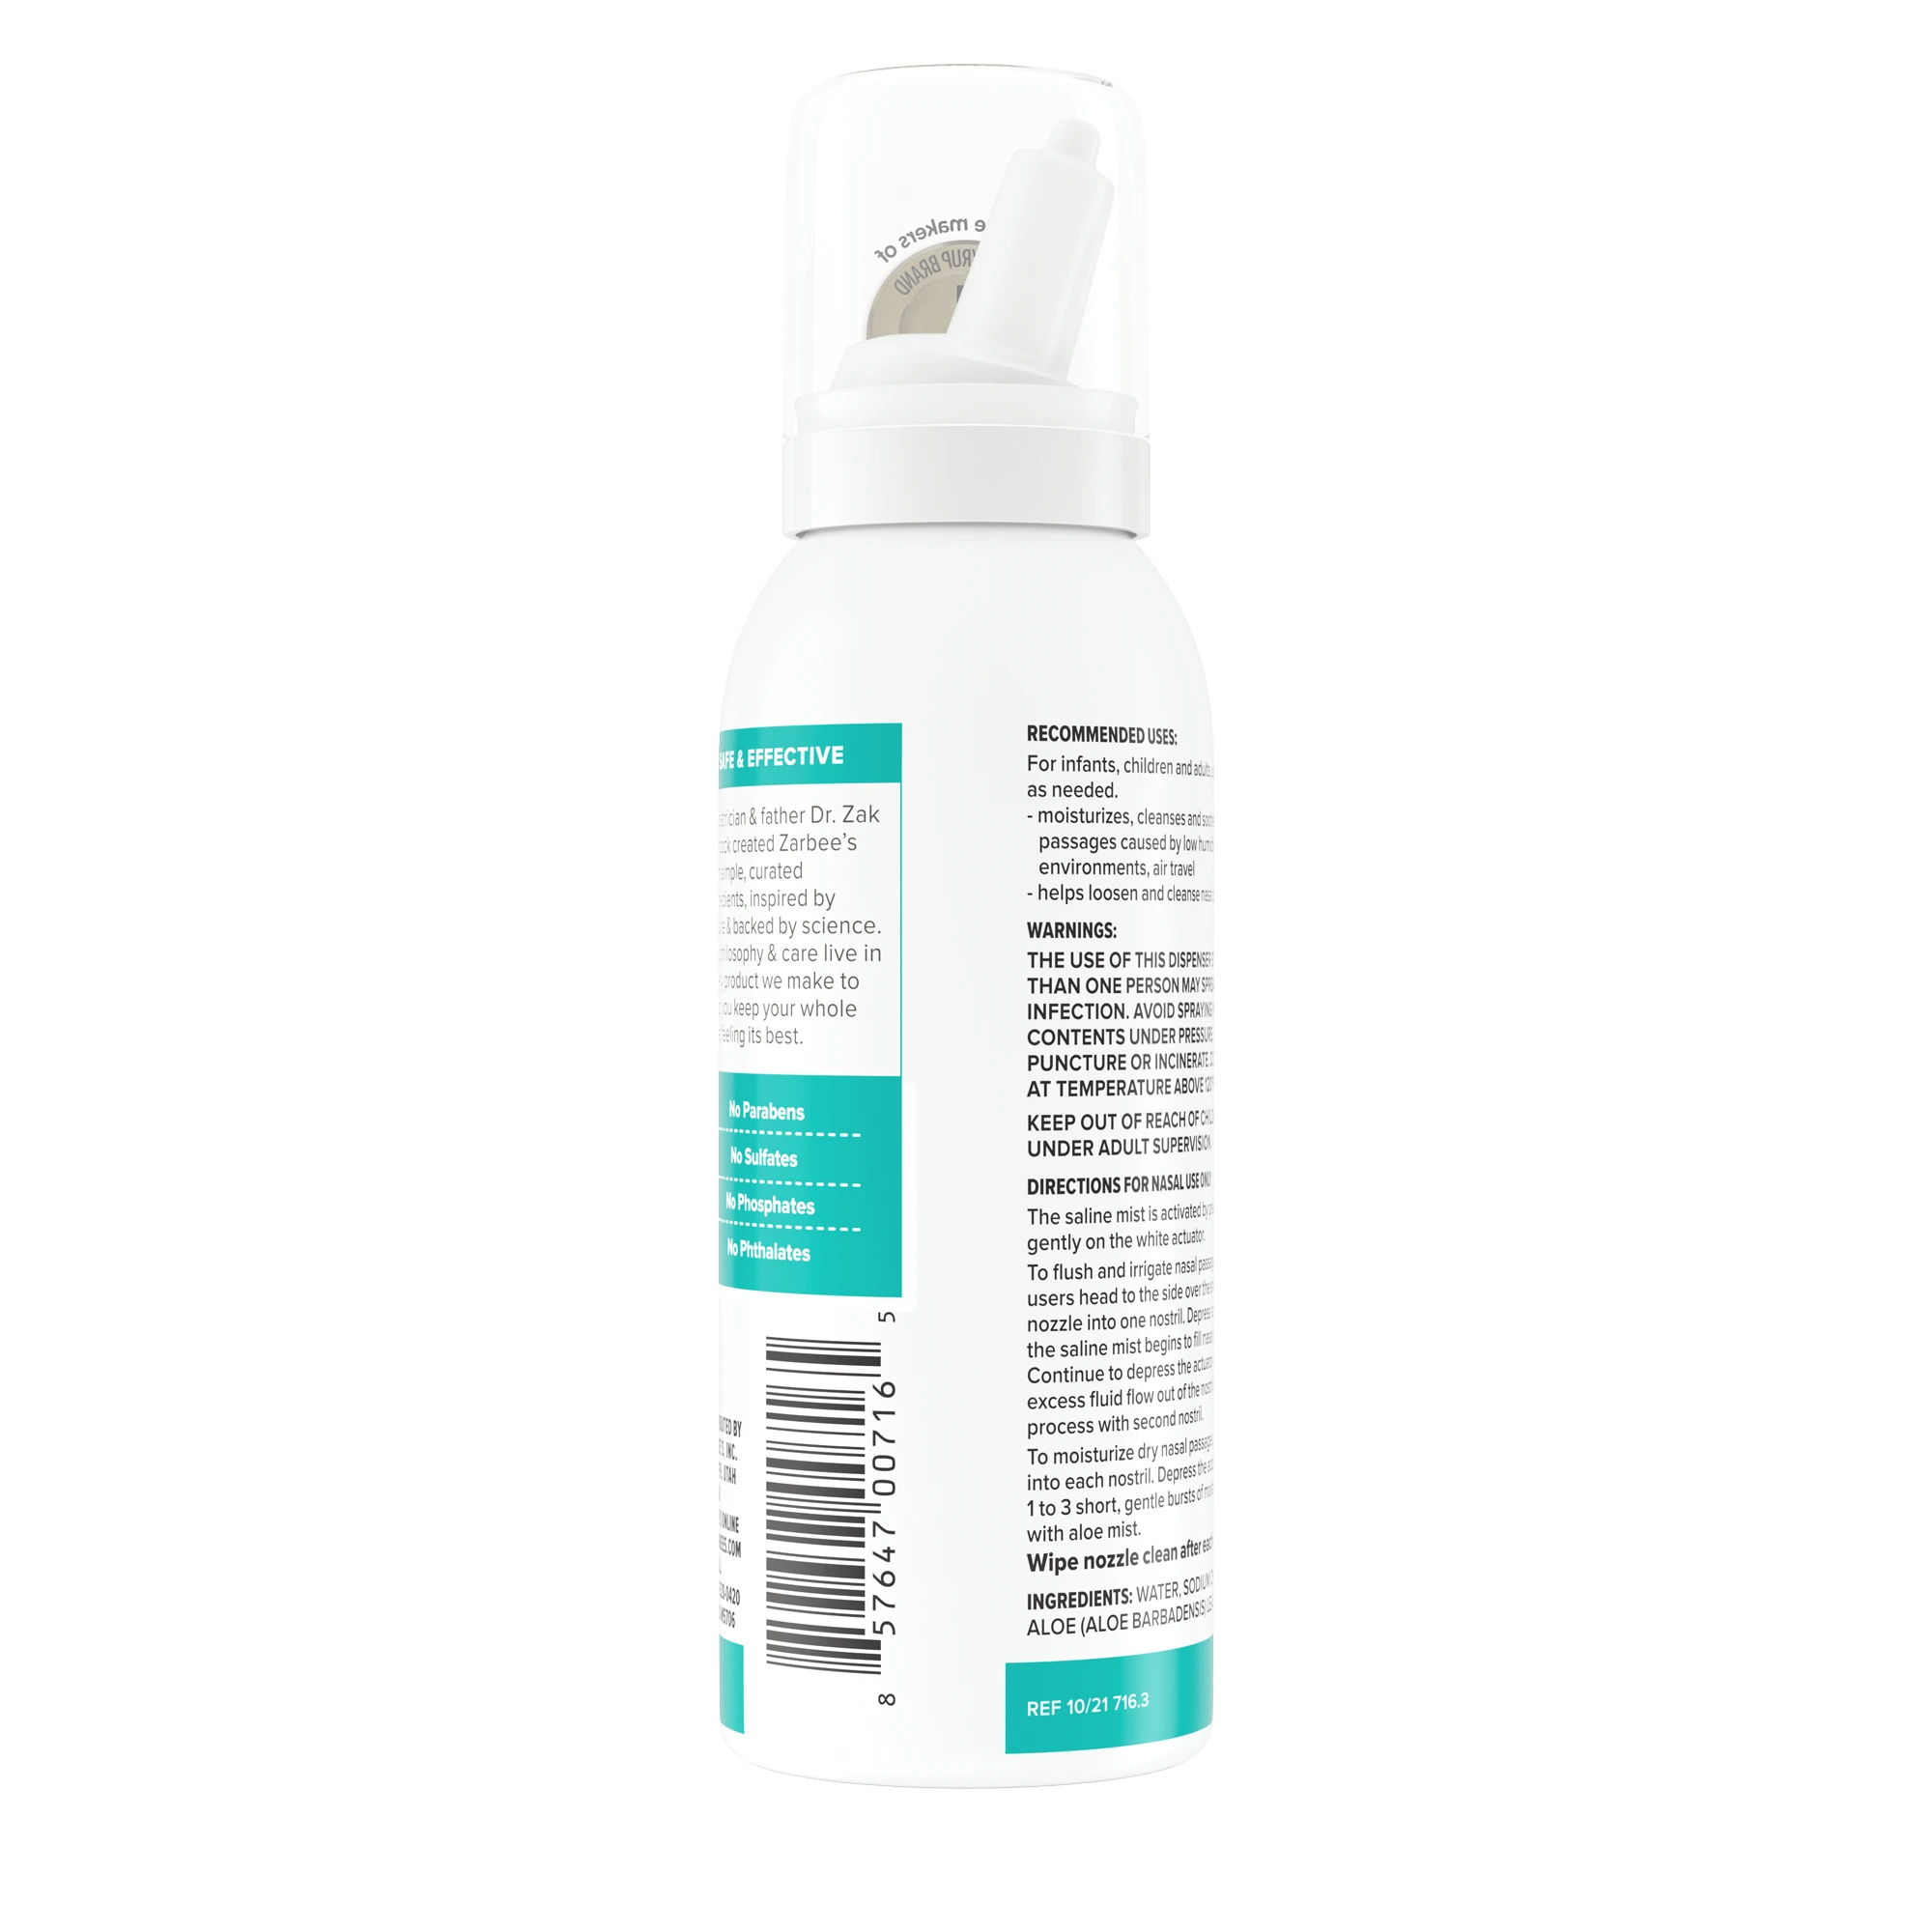 A rendering of a Zarbee’s® Soothing Saline Nasal Mist with Aloe bottle